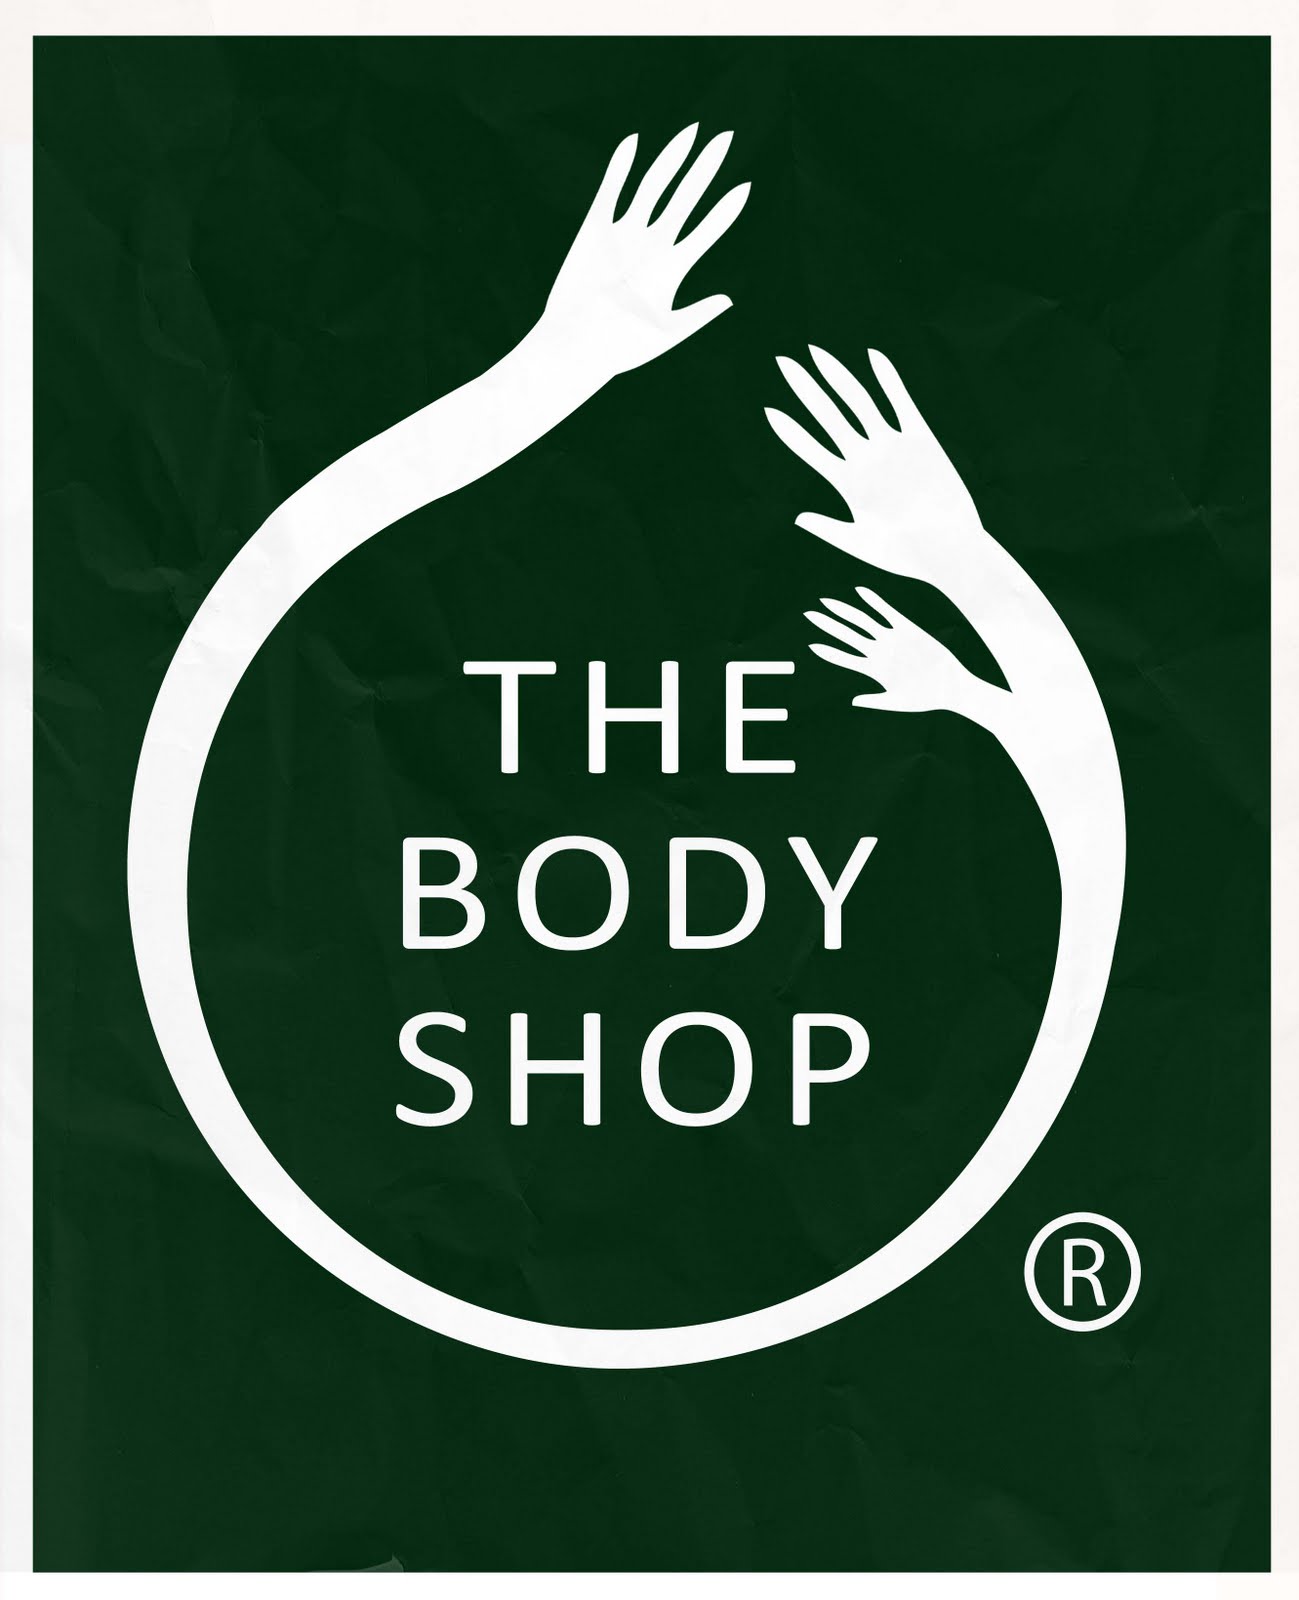 The body shop логотип. The body shop logo. Sell bodied